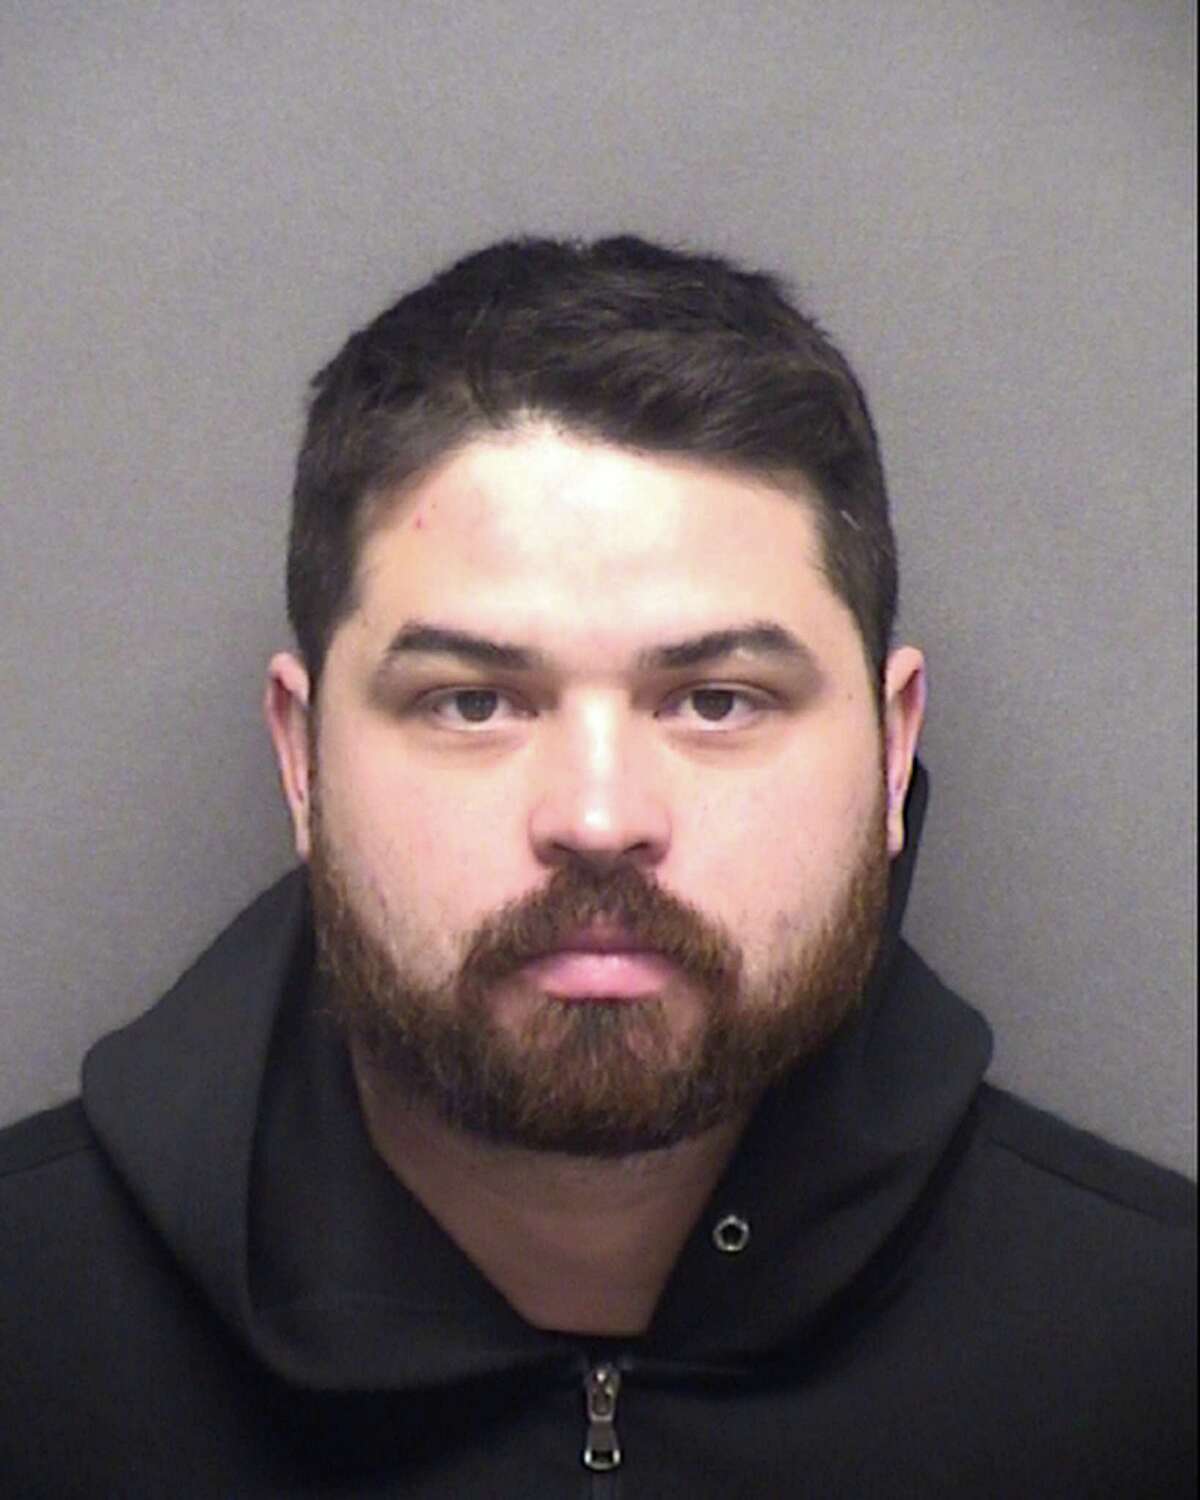 San Antonio Police Department officer Gabriel Flores is seen in a Friday Feb. 3, 2023 booking photo provided by the Bexar County Sheriff’s Department. Flores was arrested for DWI, according to an SAPD press release.